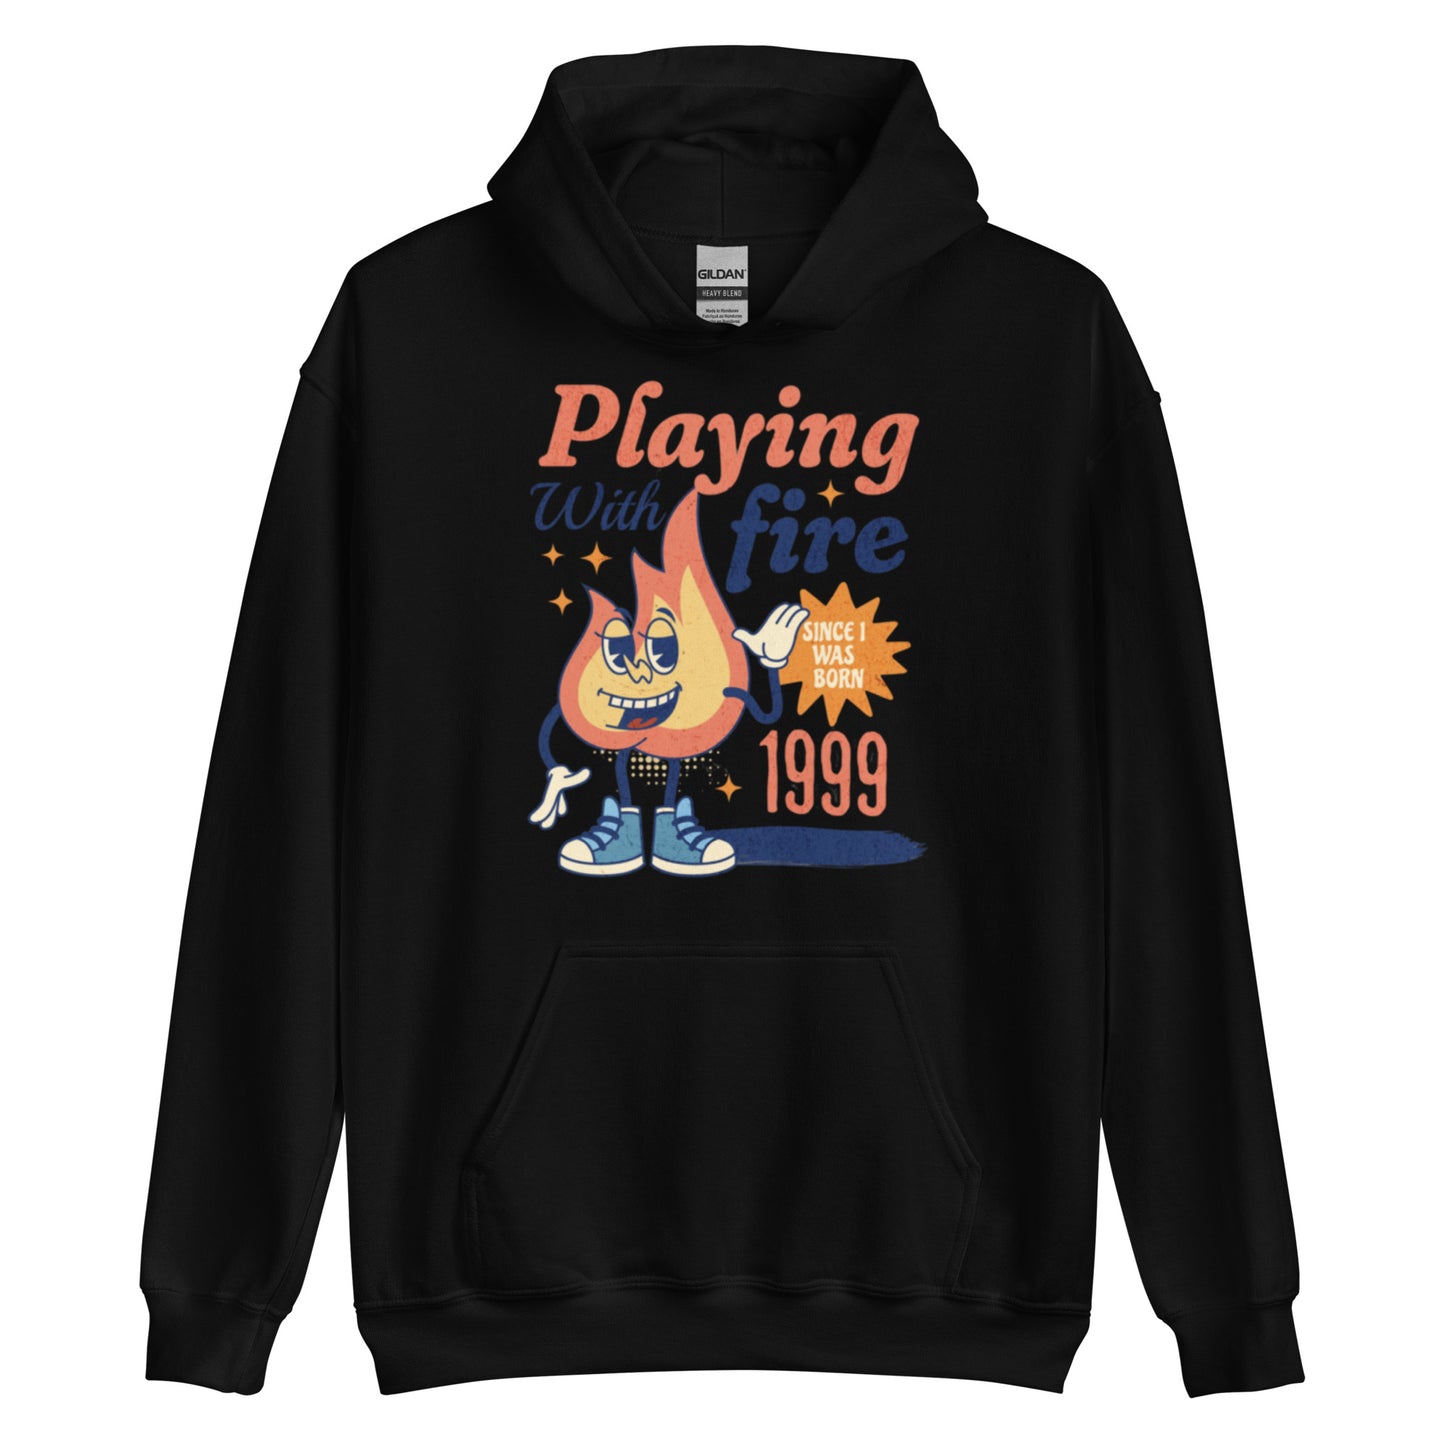 Playing With Fire Mascot Hoodie